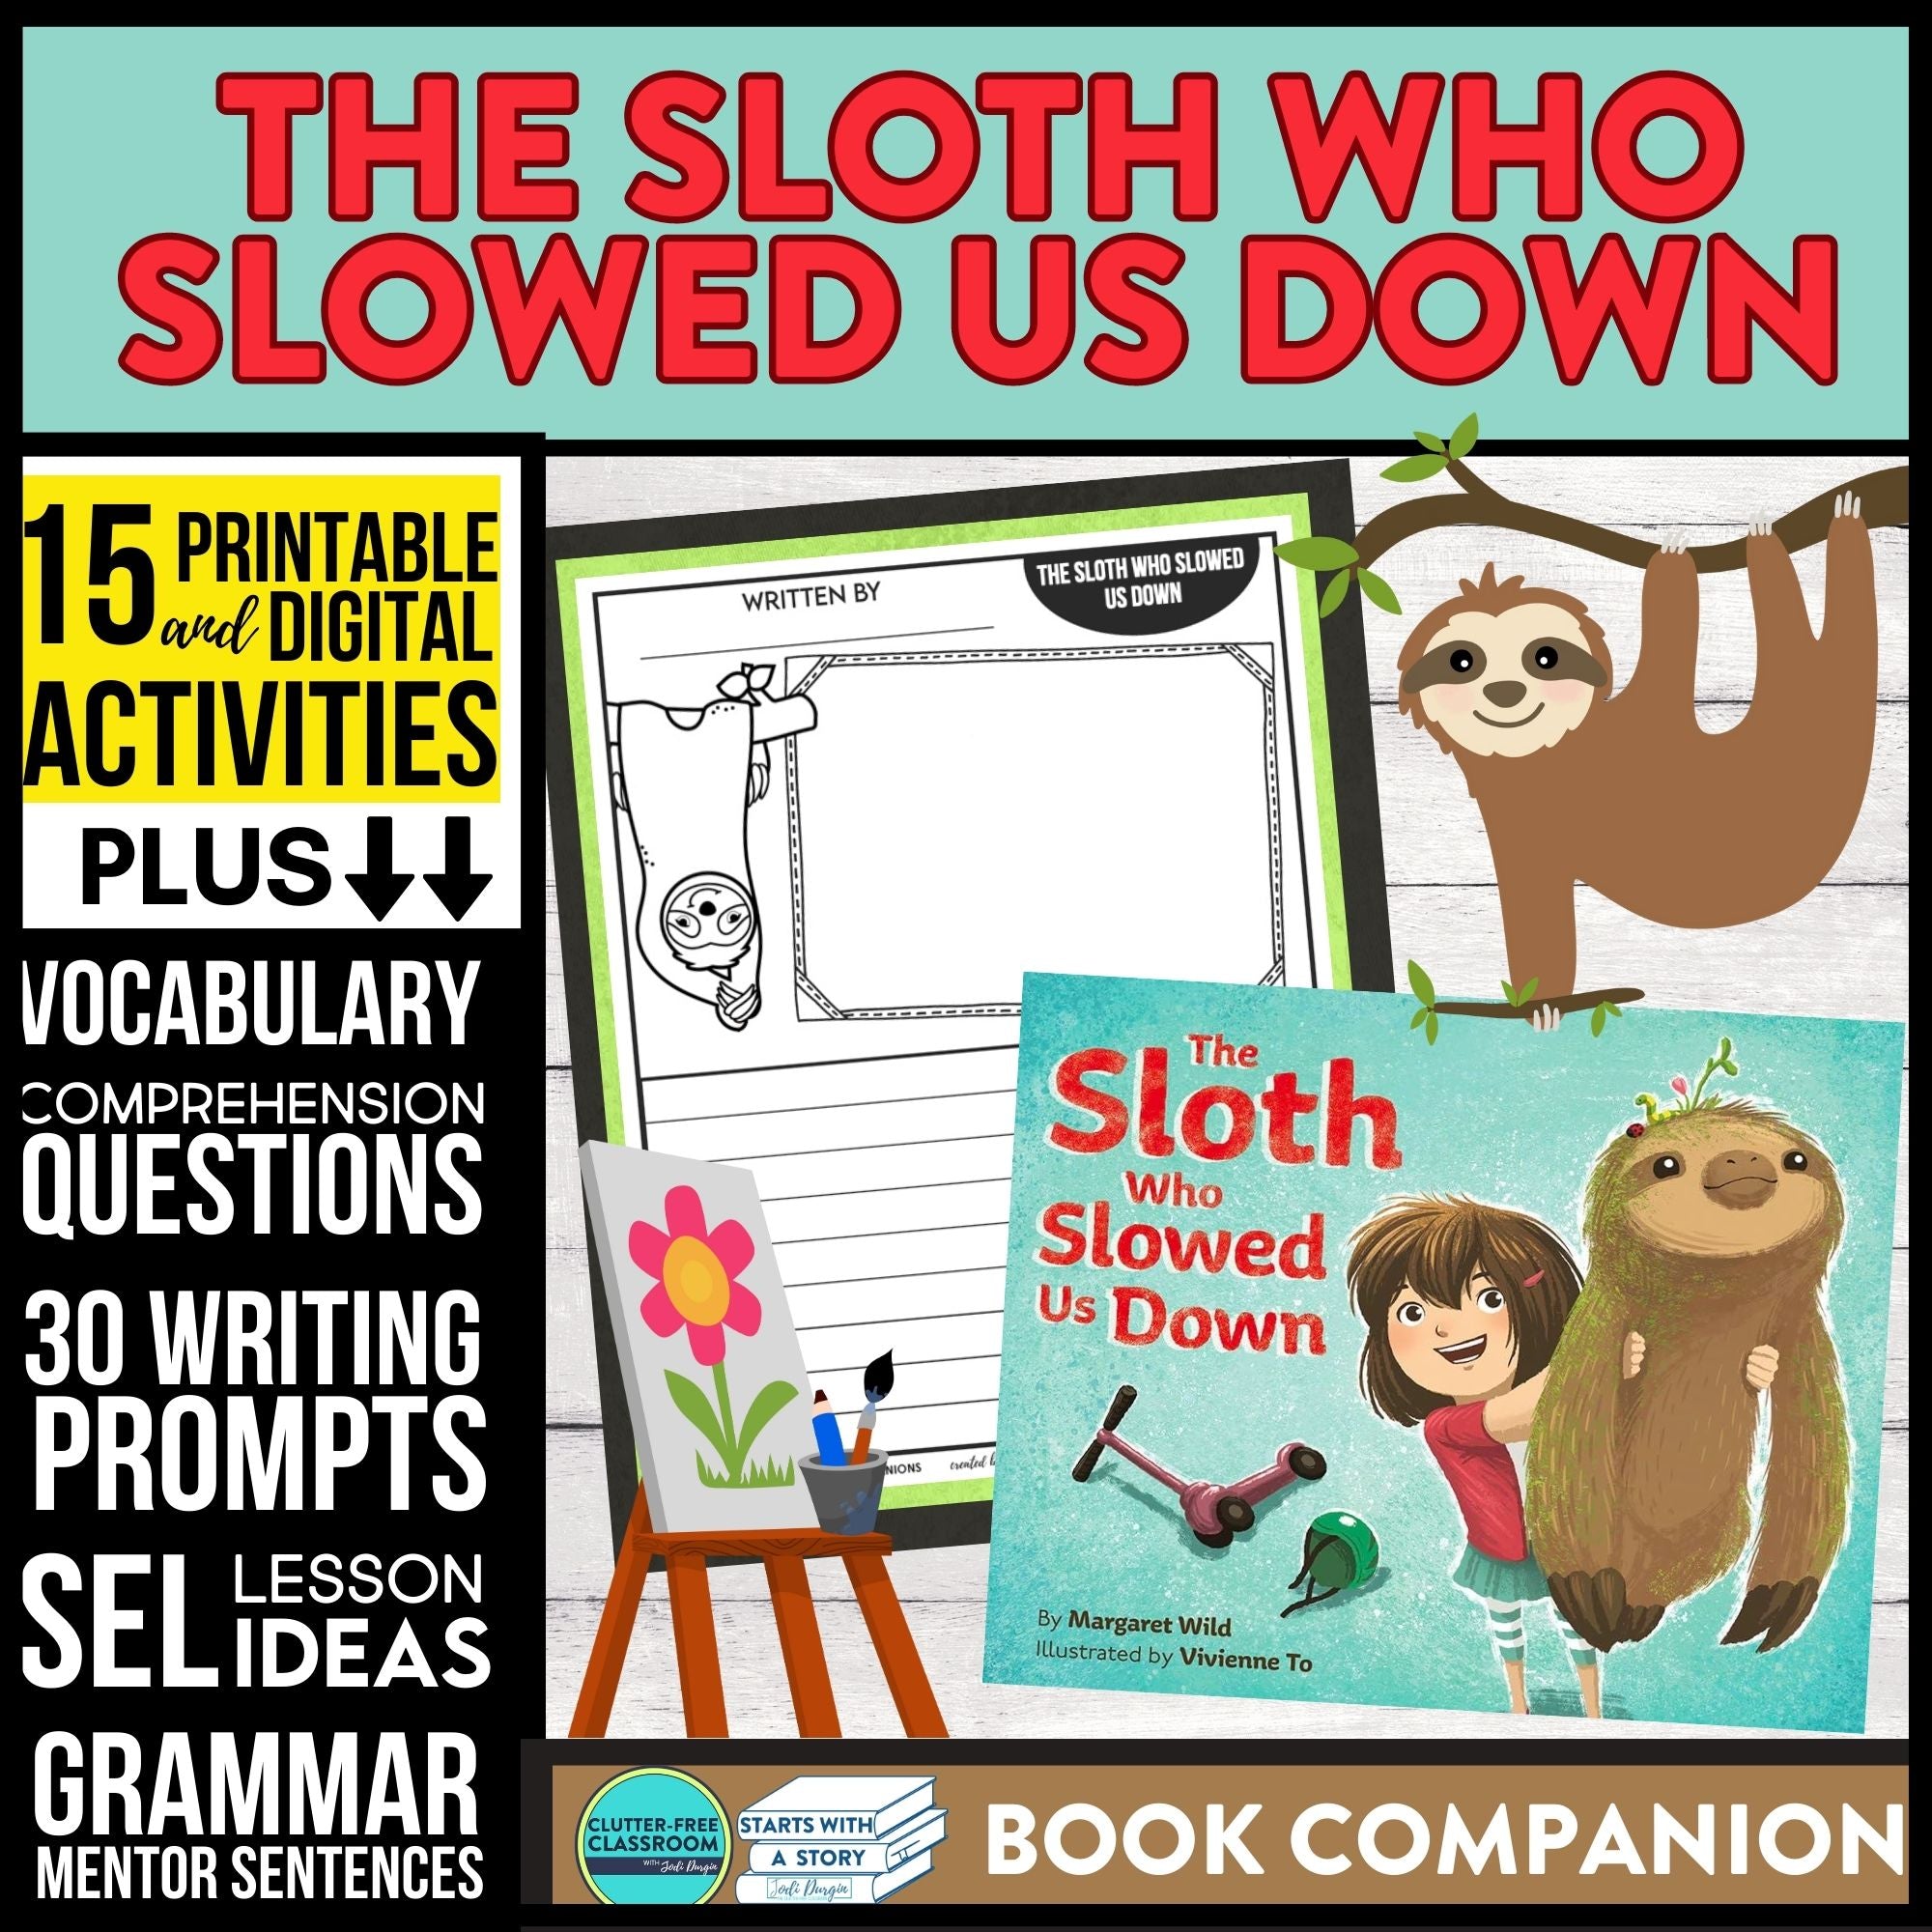 THE SLOTH WHO SLOWED US DOWN activities and lesson plan ideas